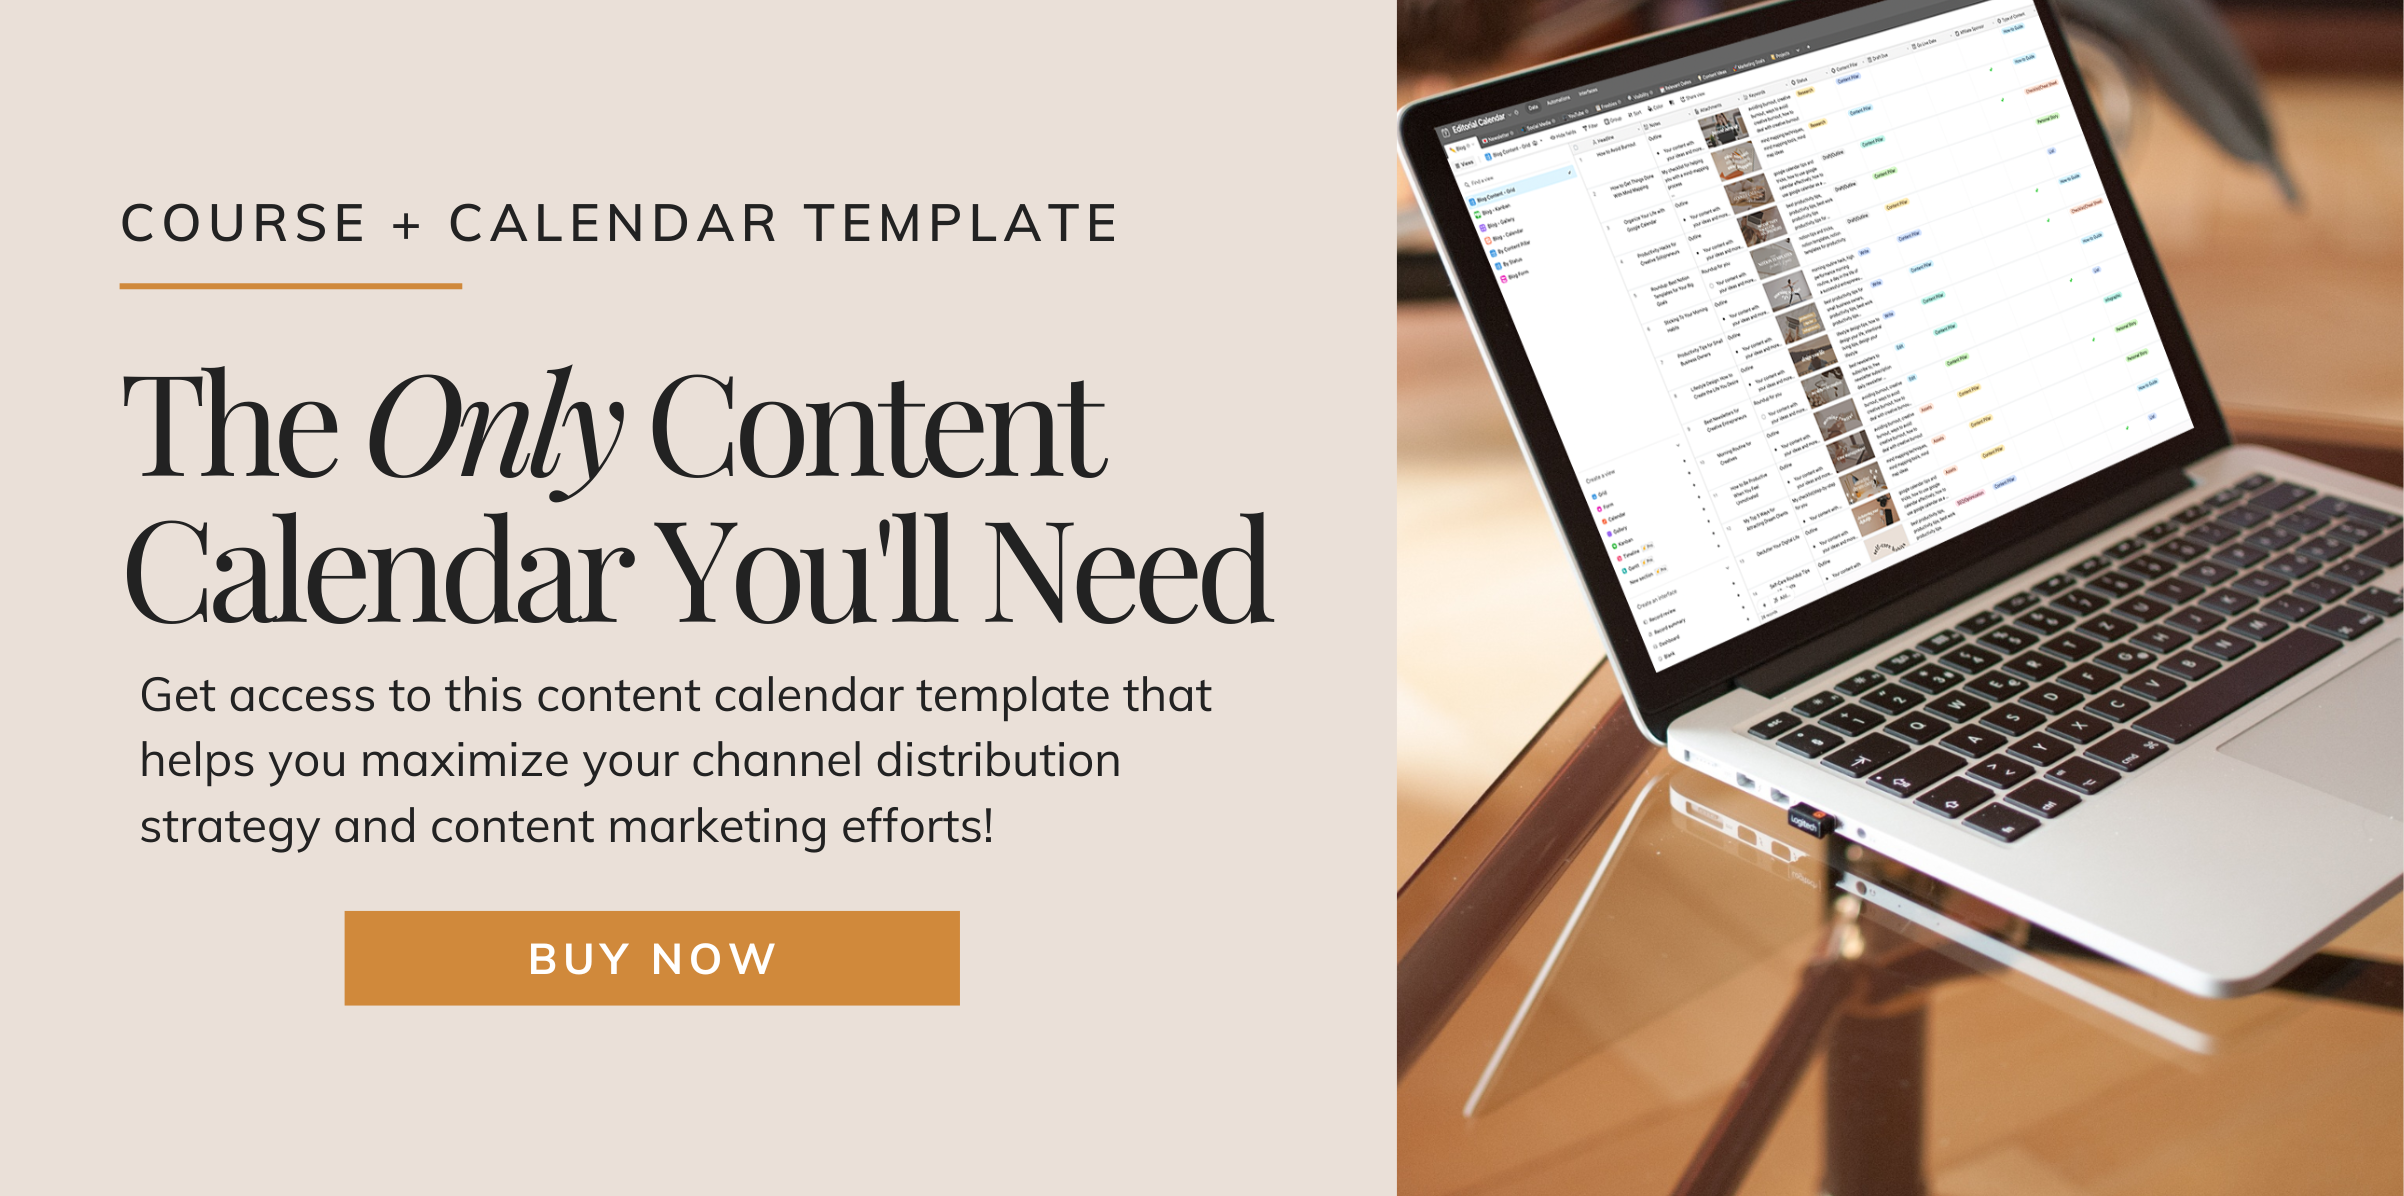 Get access to this course and content calendar template that helps you maximize your channel distribution and helps you with your content marketing.